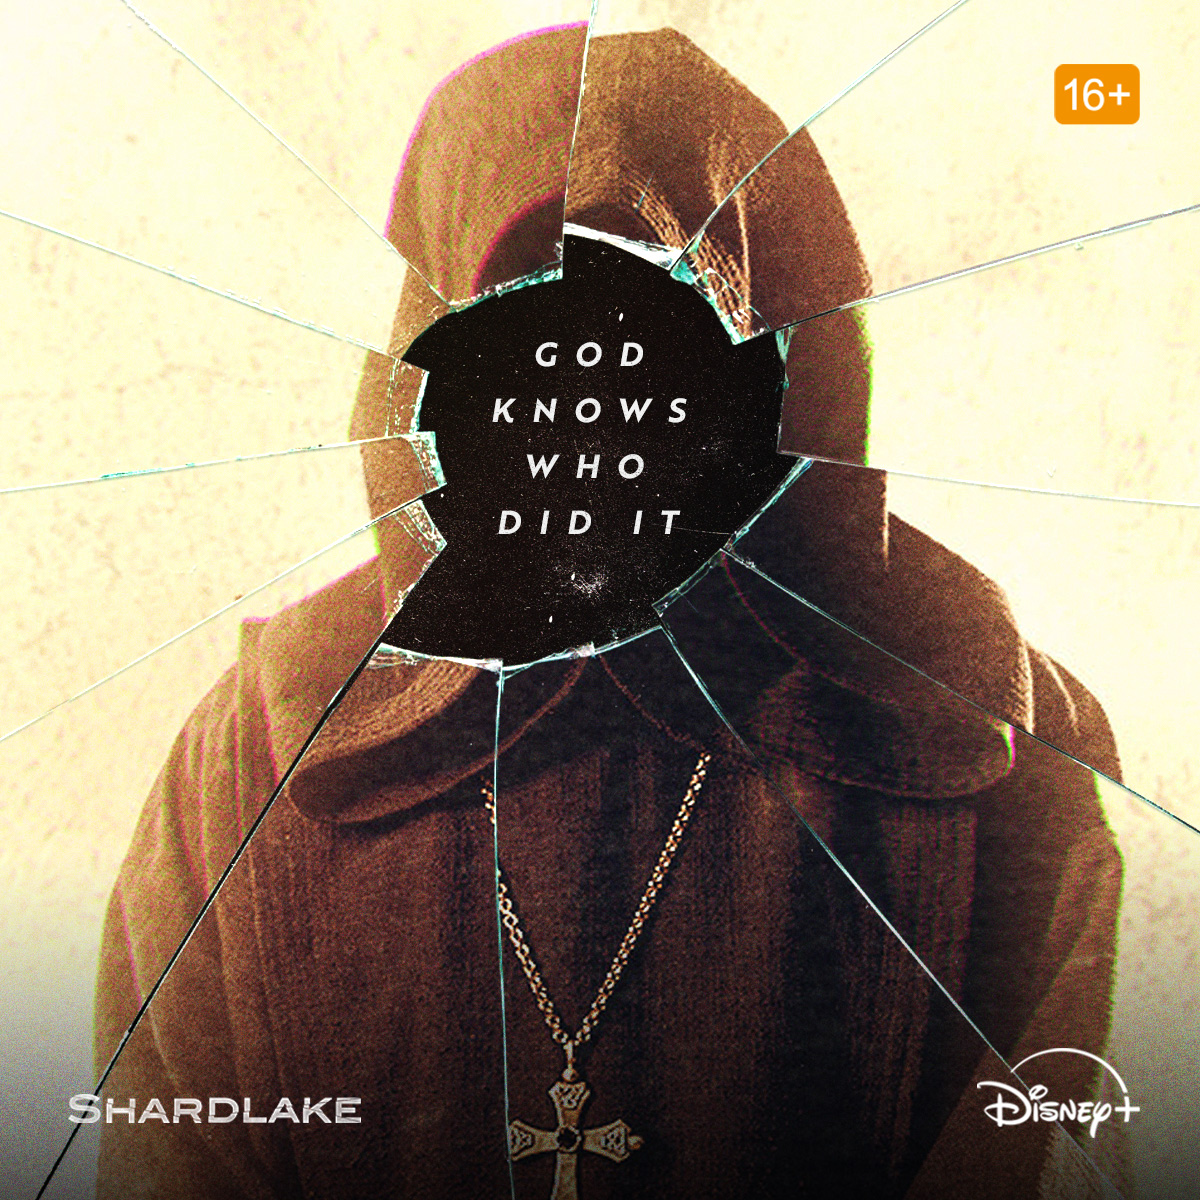 In 1536 England, Shardlake investigates a death at a monastery where deceit and corruption are rife.
#Shardlake is now streaming on #DisneyPlusZA